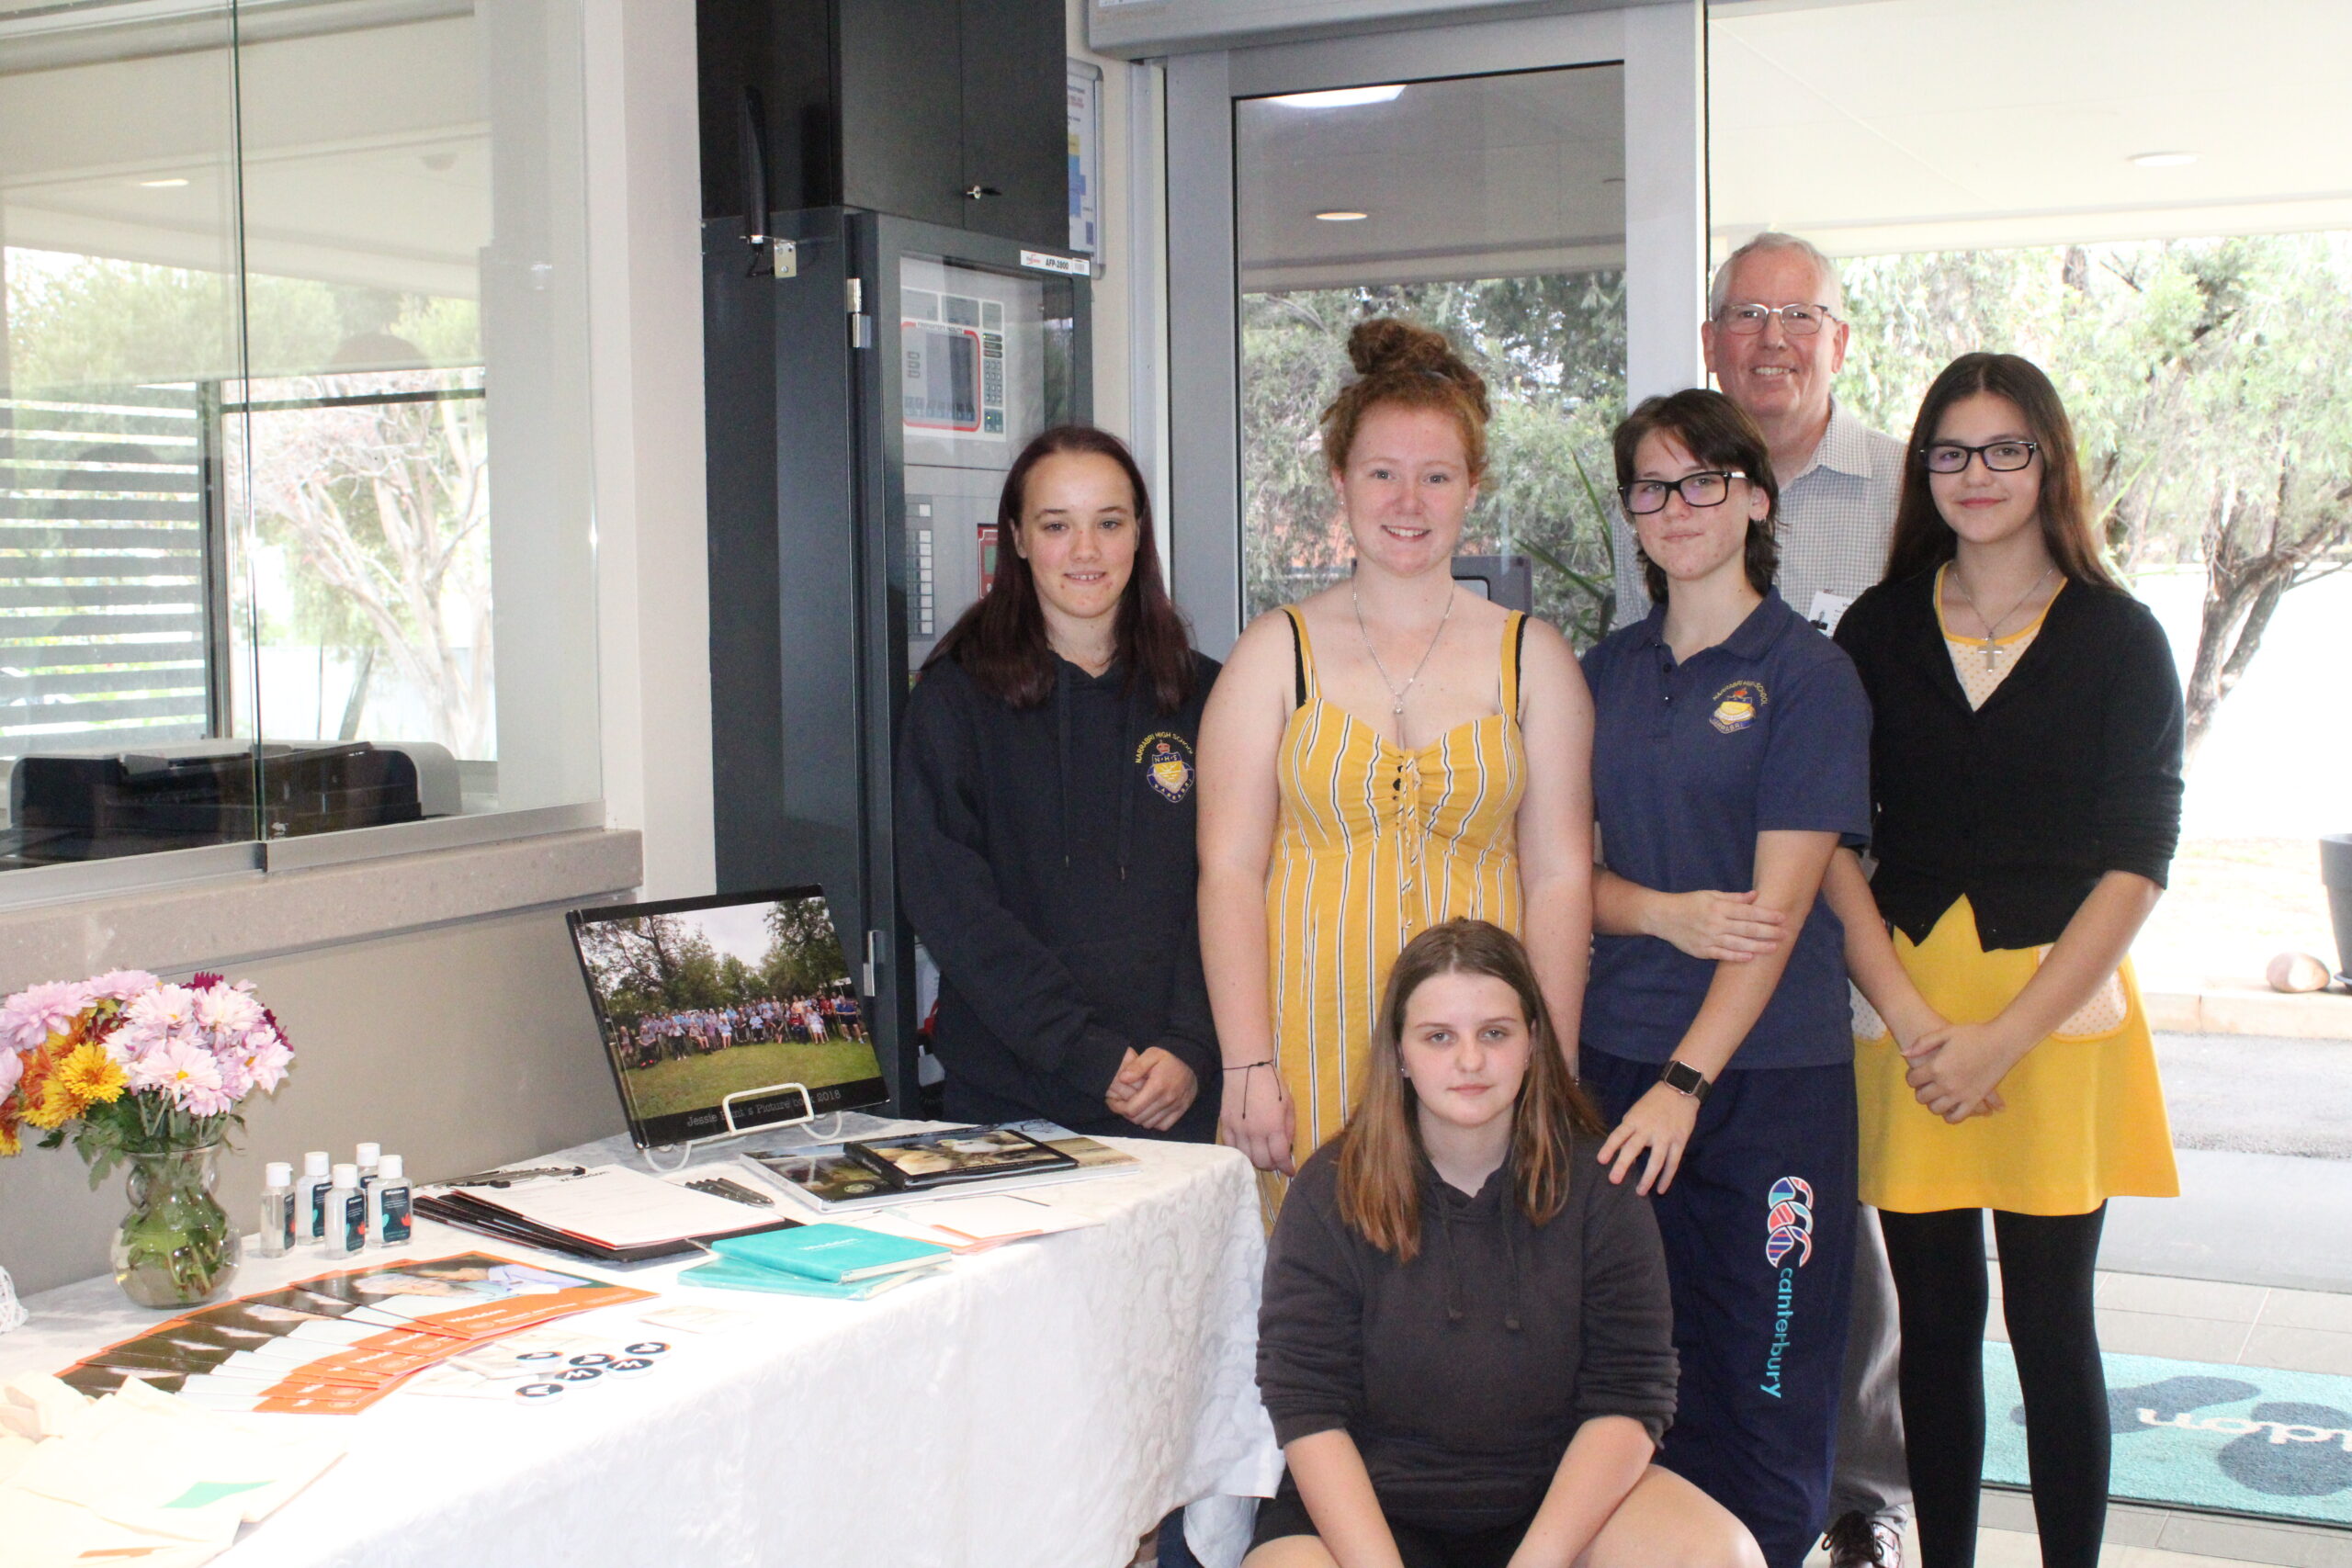 Narrabri High School Student Careers Advisor, Mark Randall with students who attended the Whiddon Careers Information Day, back: Centre, Samone Parker, Lillie-Mae Groth, Larnie Durkin and Eryn Parkes, front, Kaitlyn Wall.